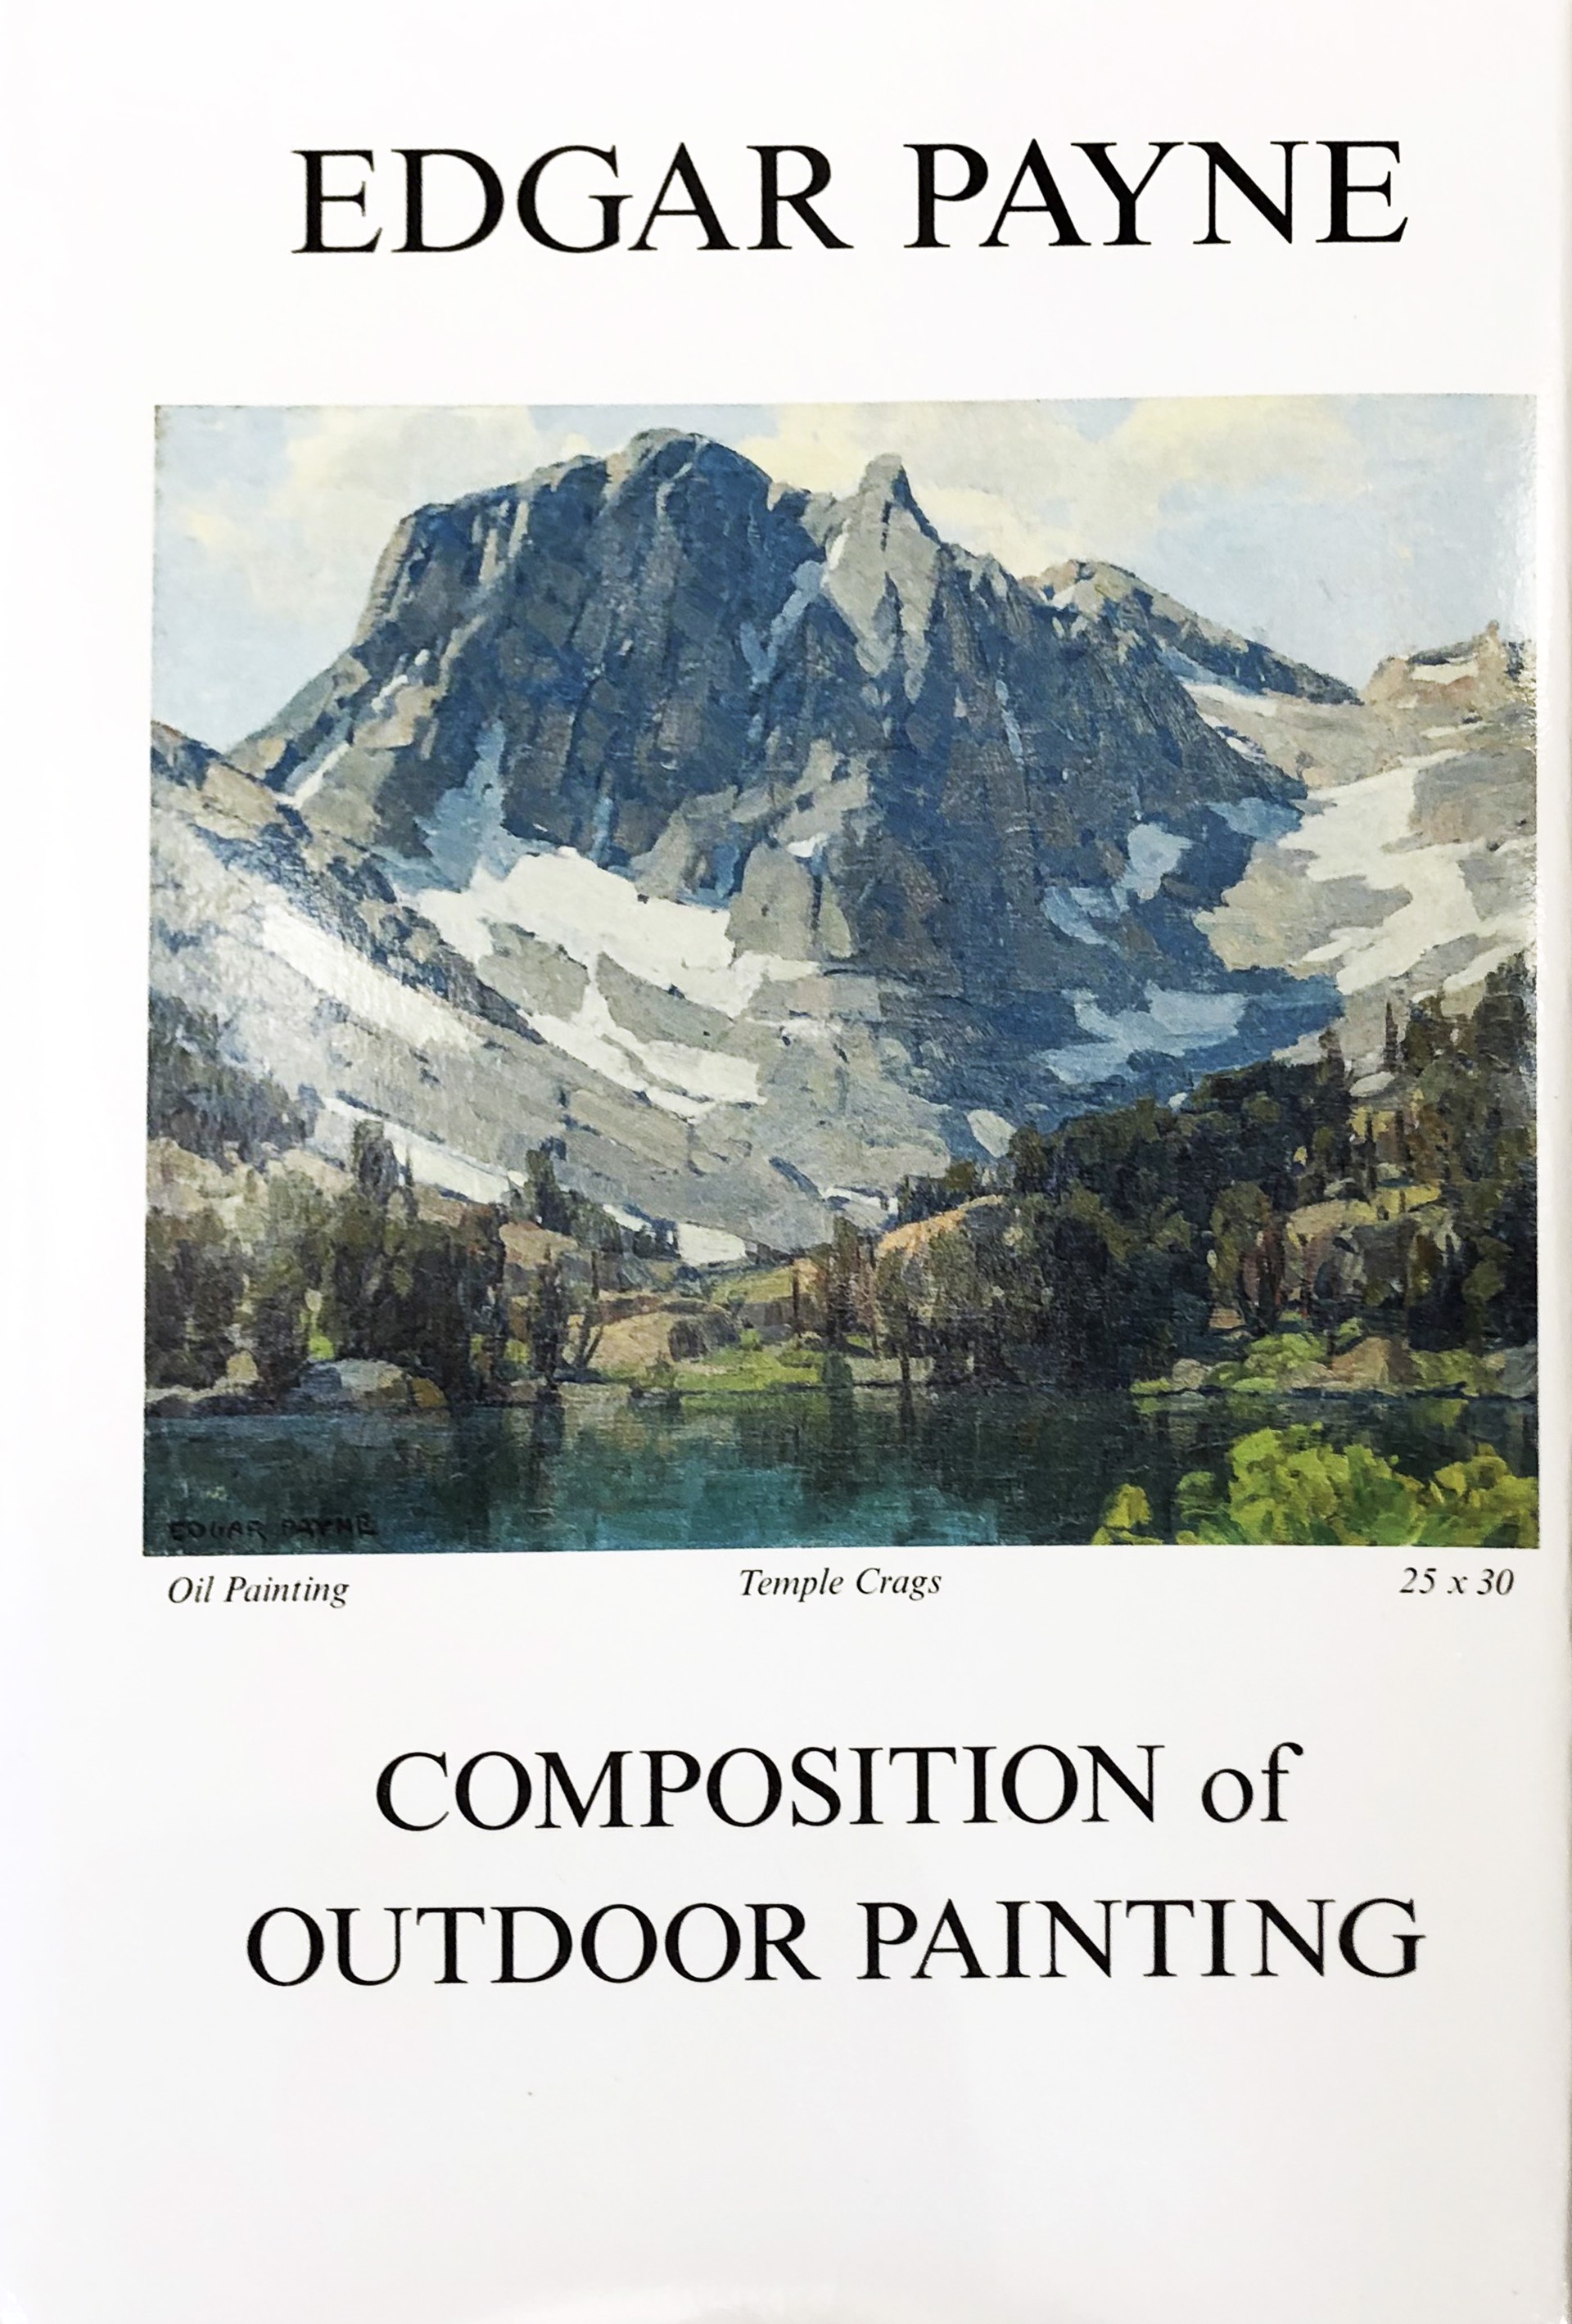 Composition of Outdoor Painting by Edgar Payne